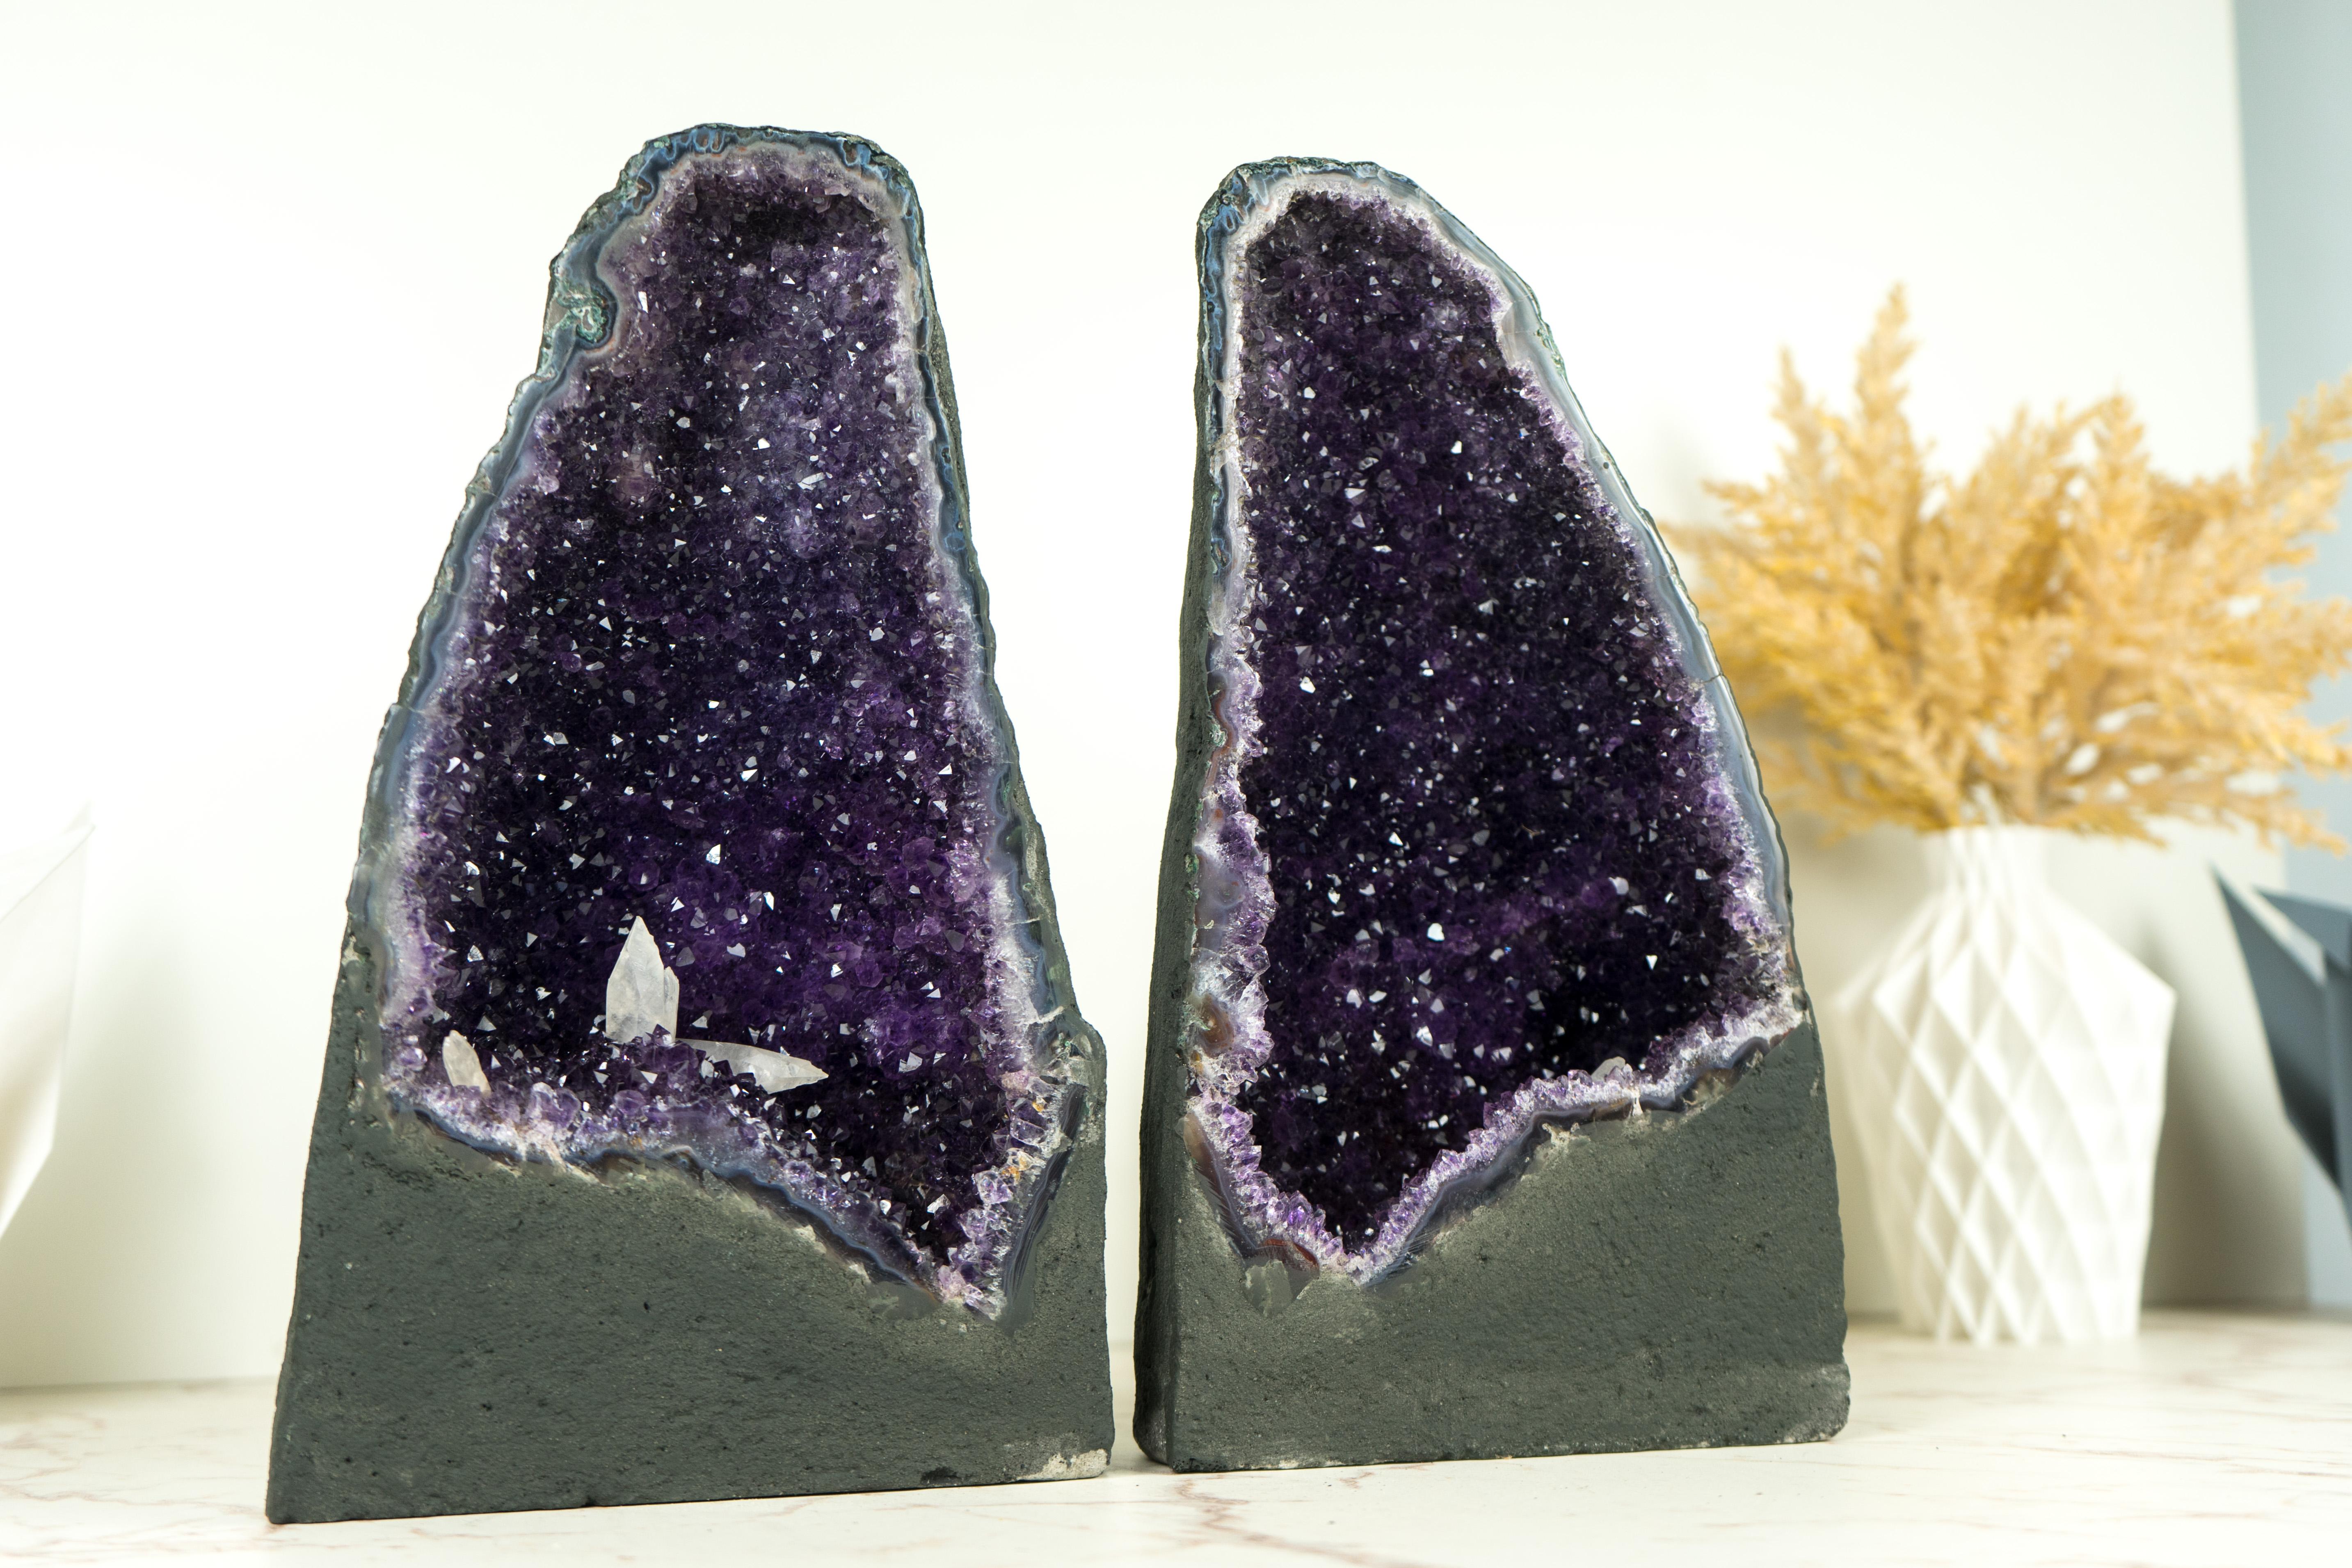 Brazilian All-Natural Amethyst Geodes with Intact Calcite and Rich Purple Galaxy Amethyst  For Sale